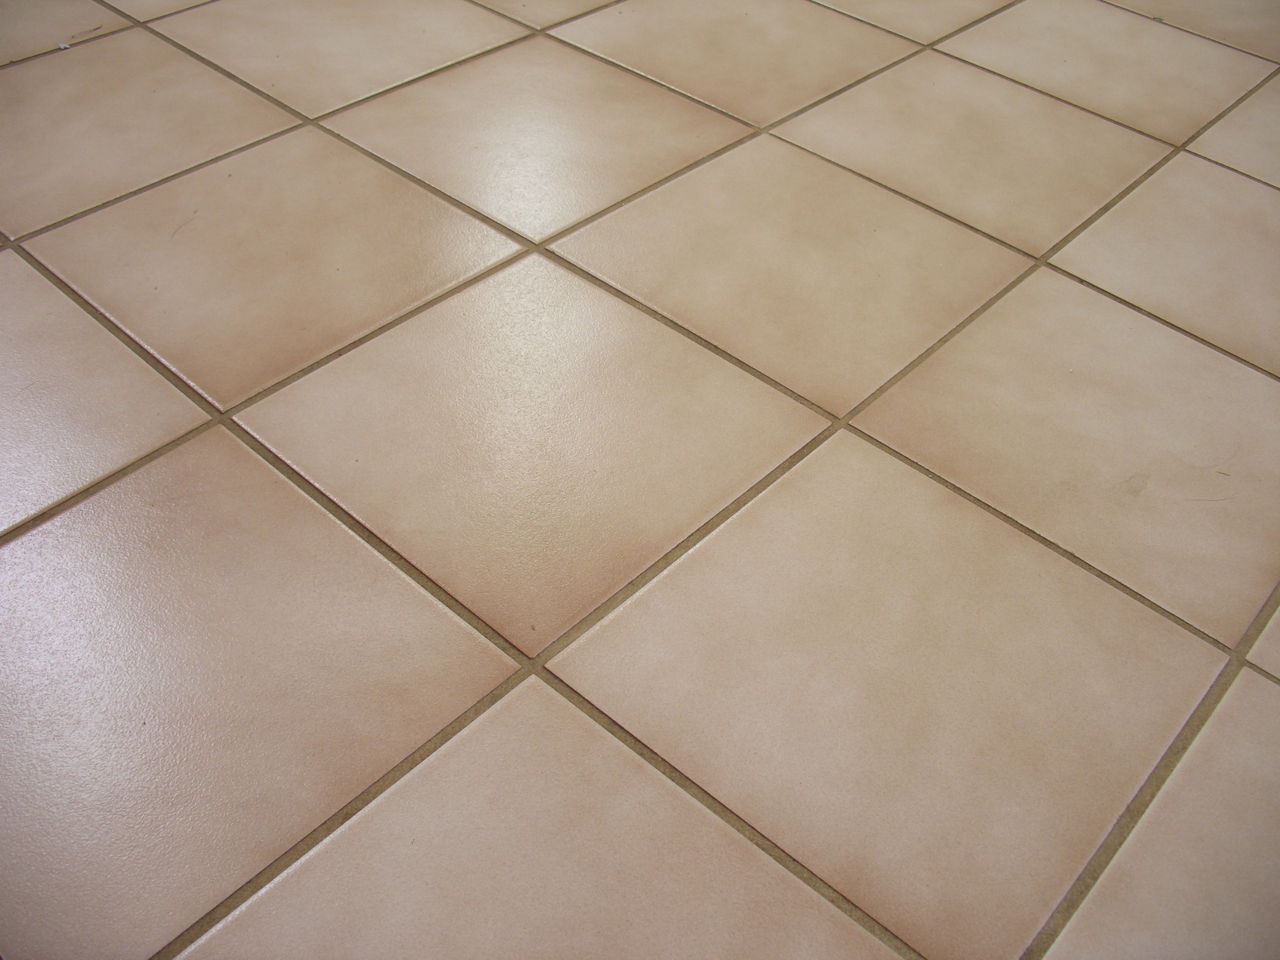 floor tile patterns can enhance the look of any room. however, most of BZNRNWM